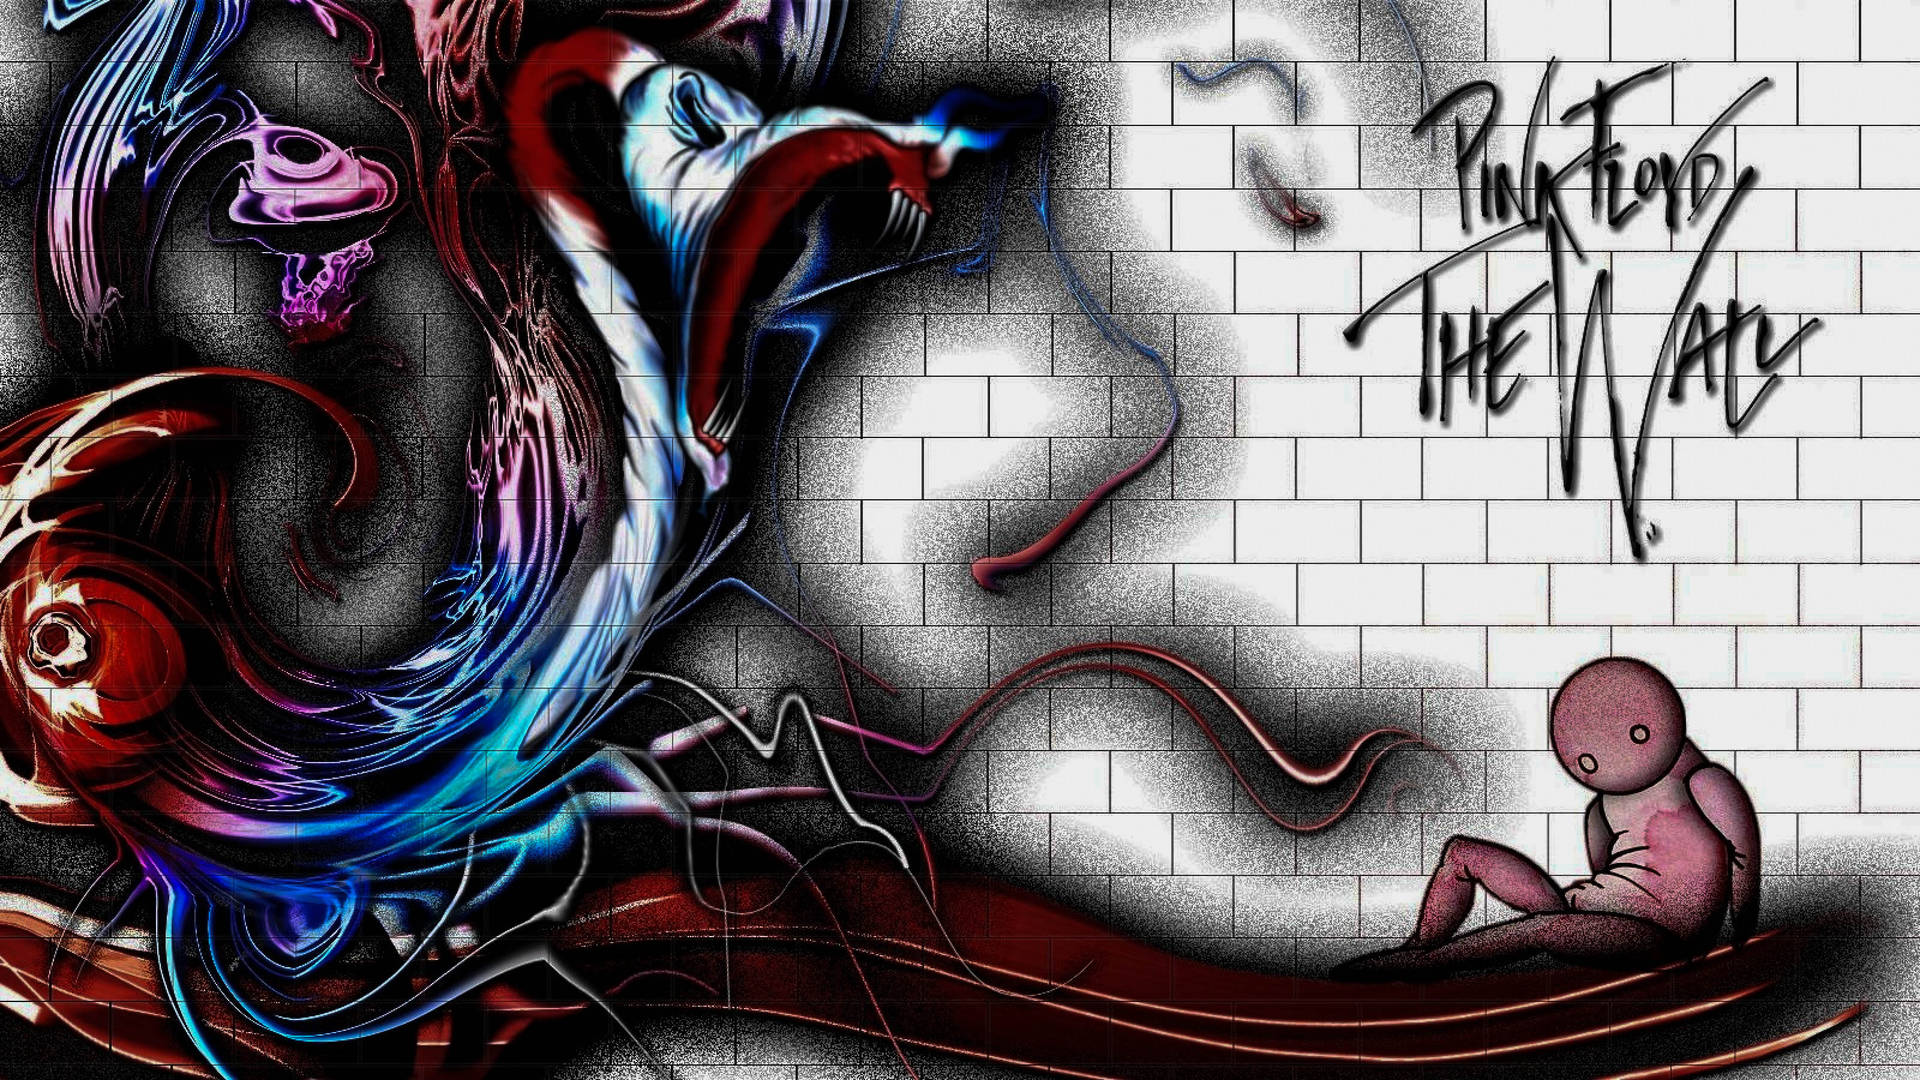 Pink Floyd 4k The Wall Graffiti Aesthetic Background